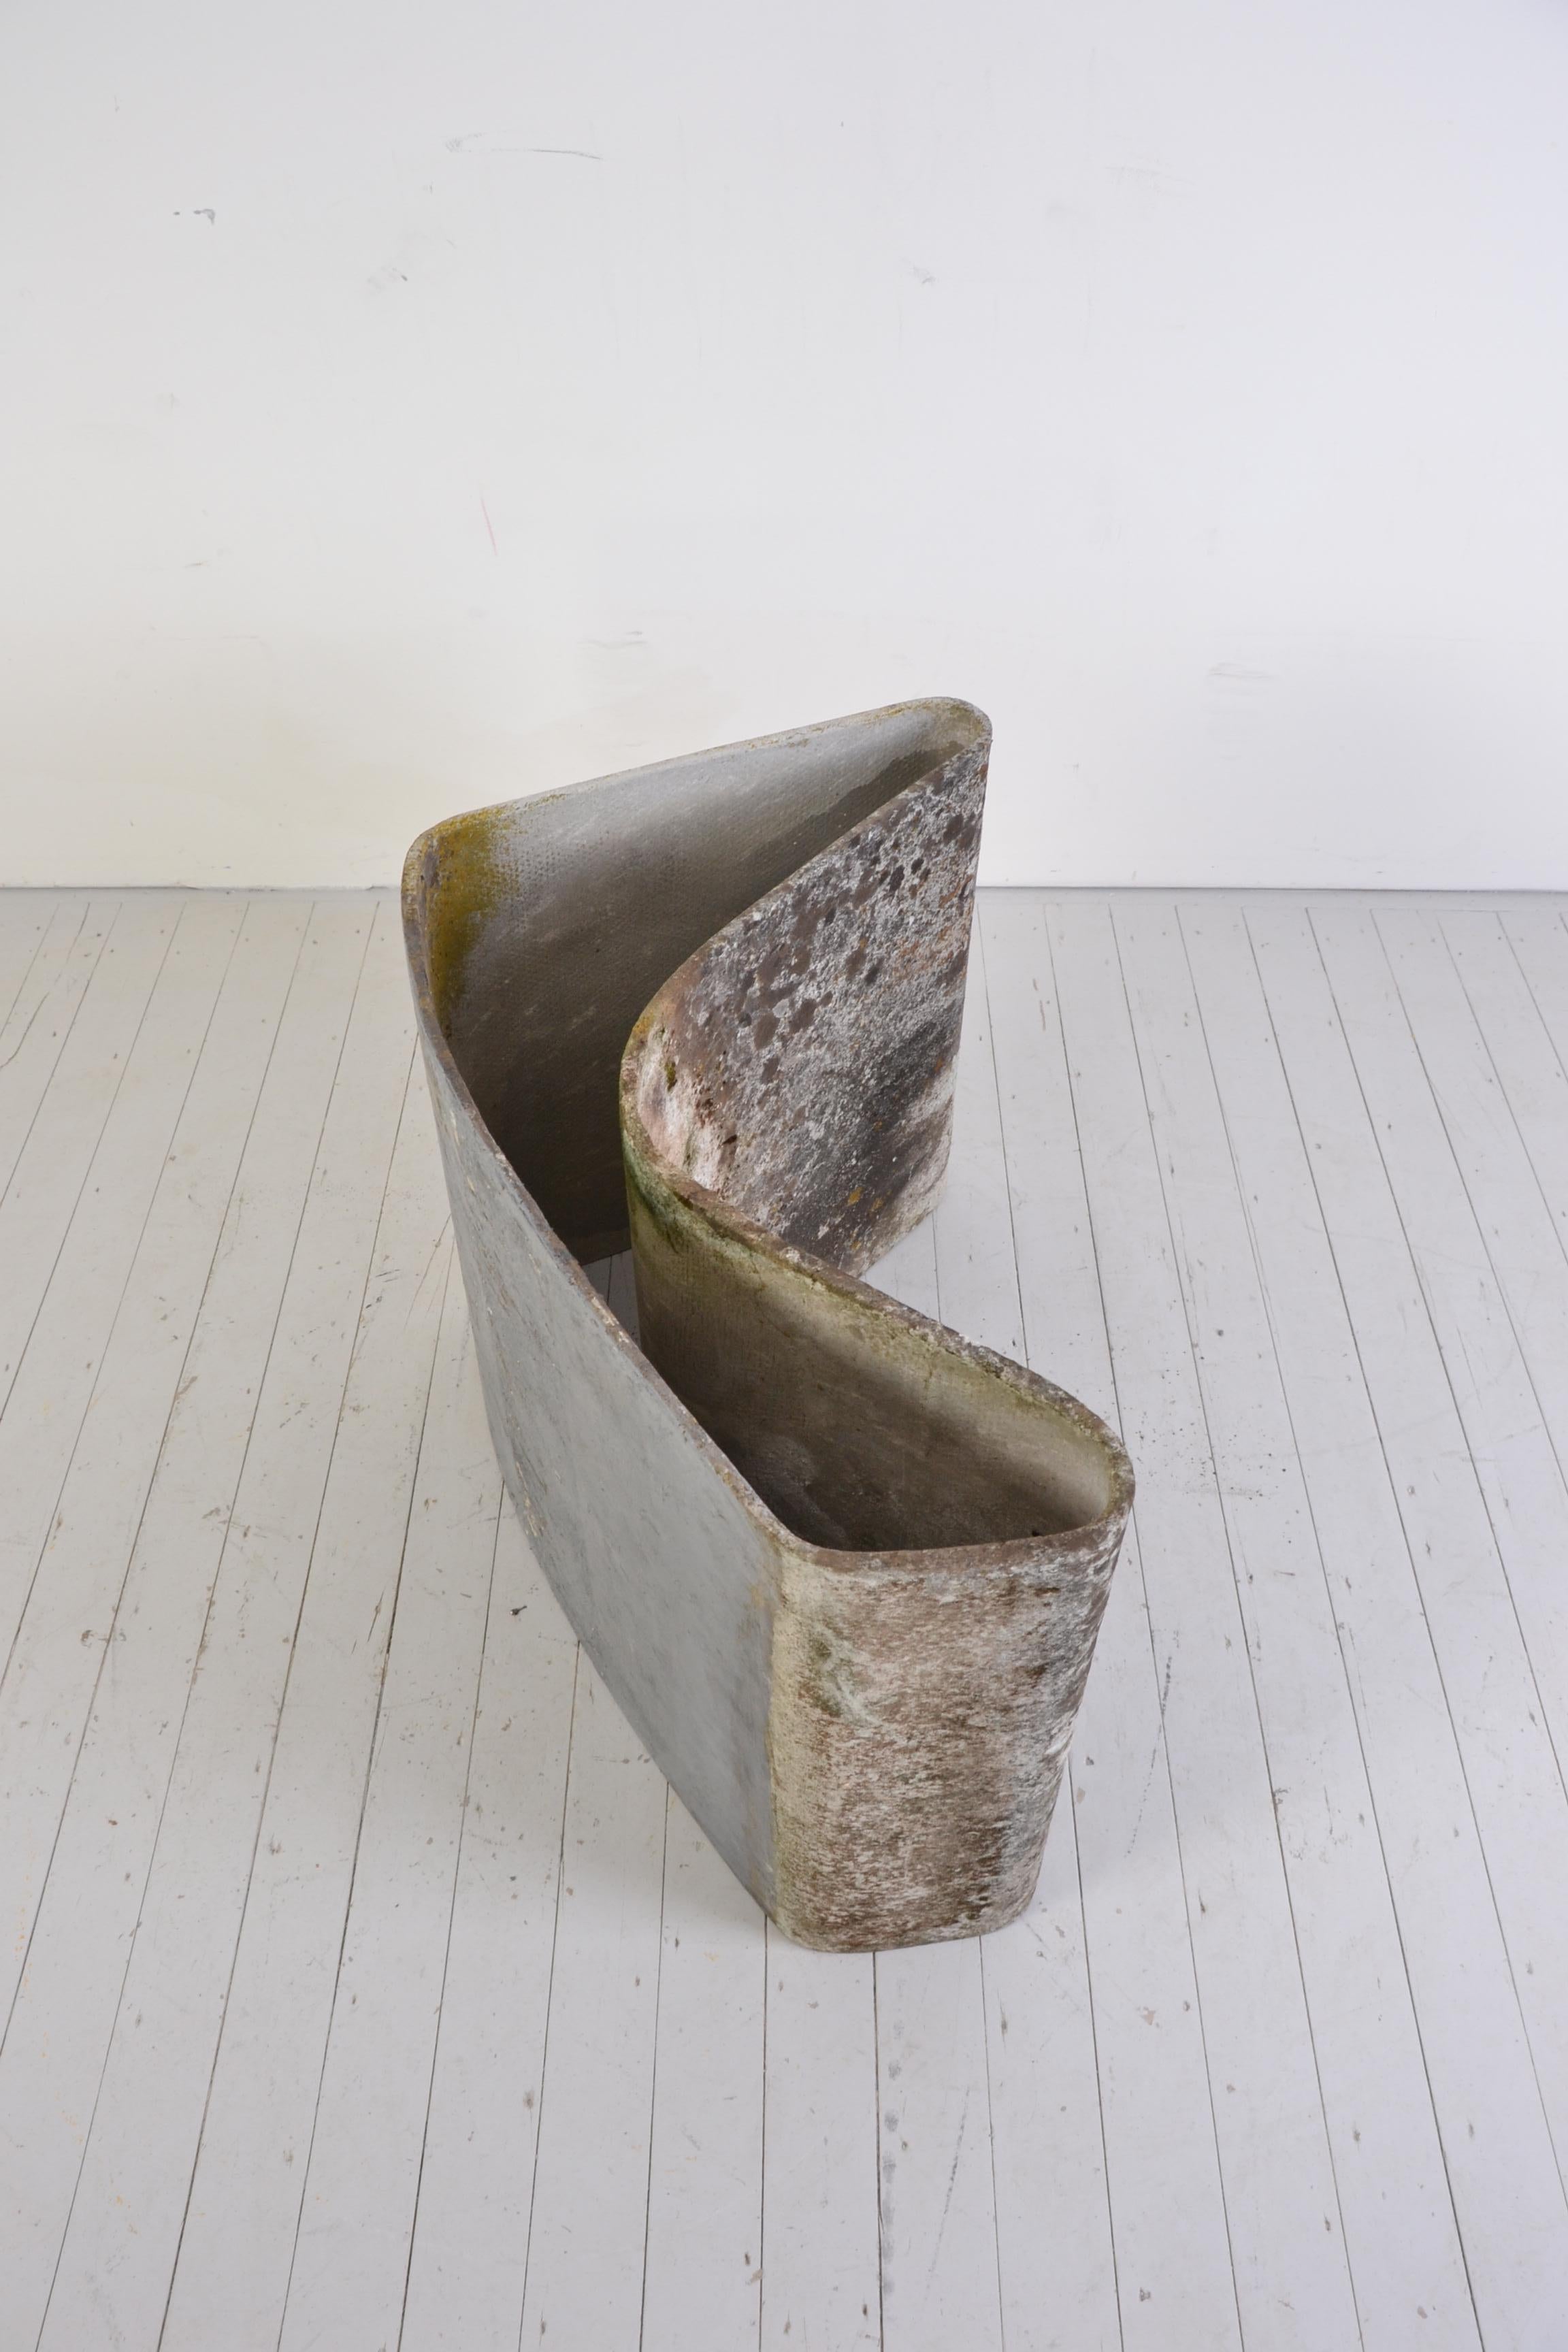 Willy Guhl Concrete Loop Chairs, 1st Edition For Sale 2